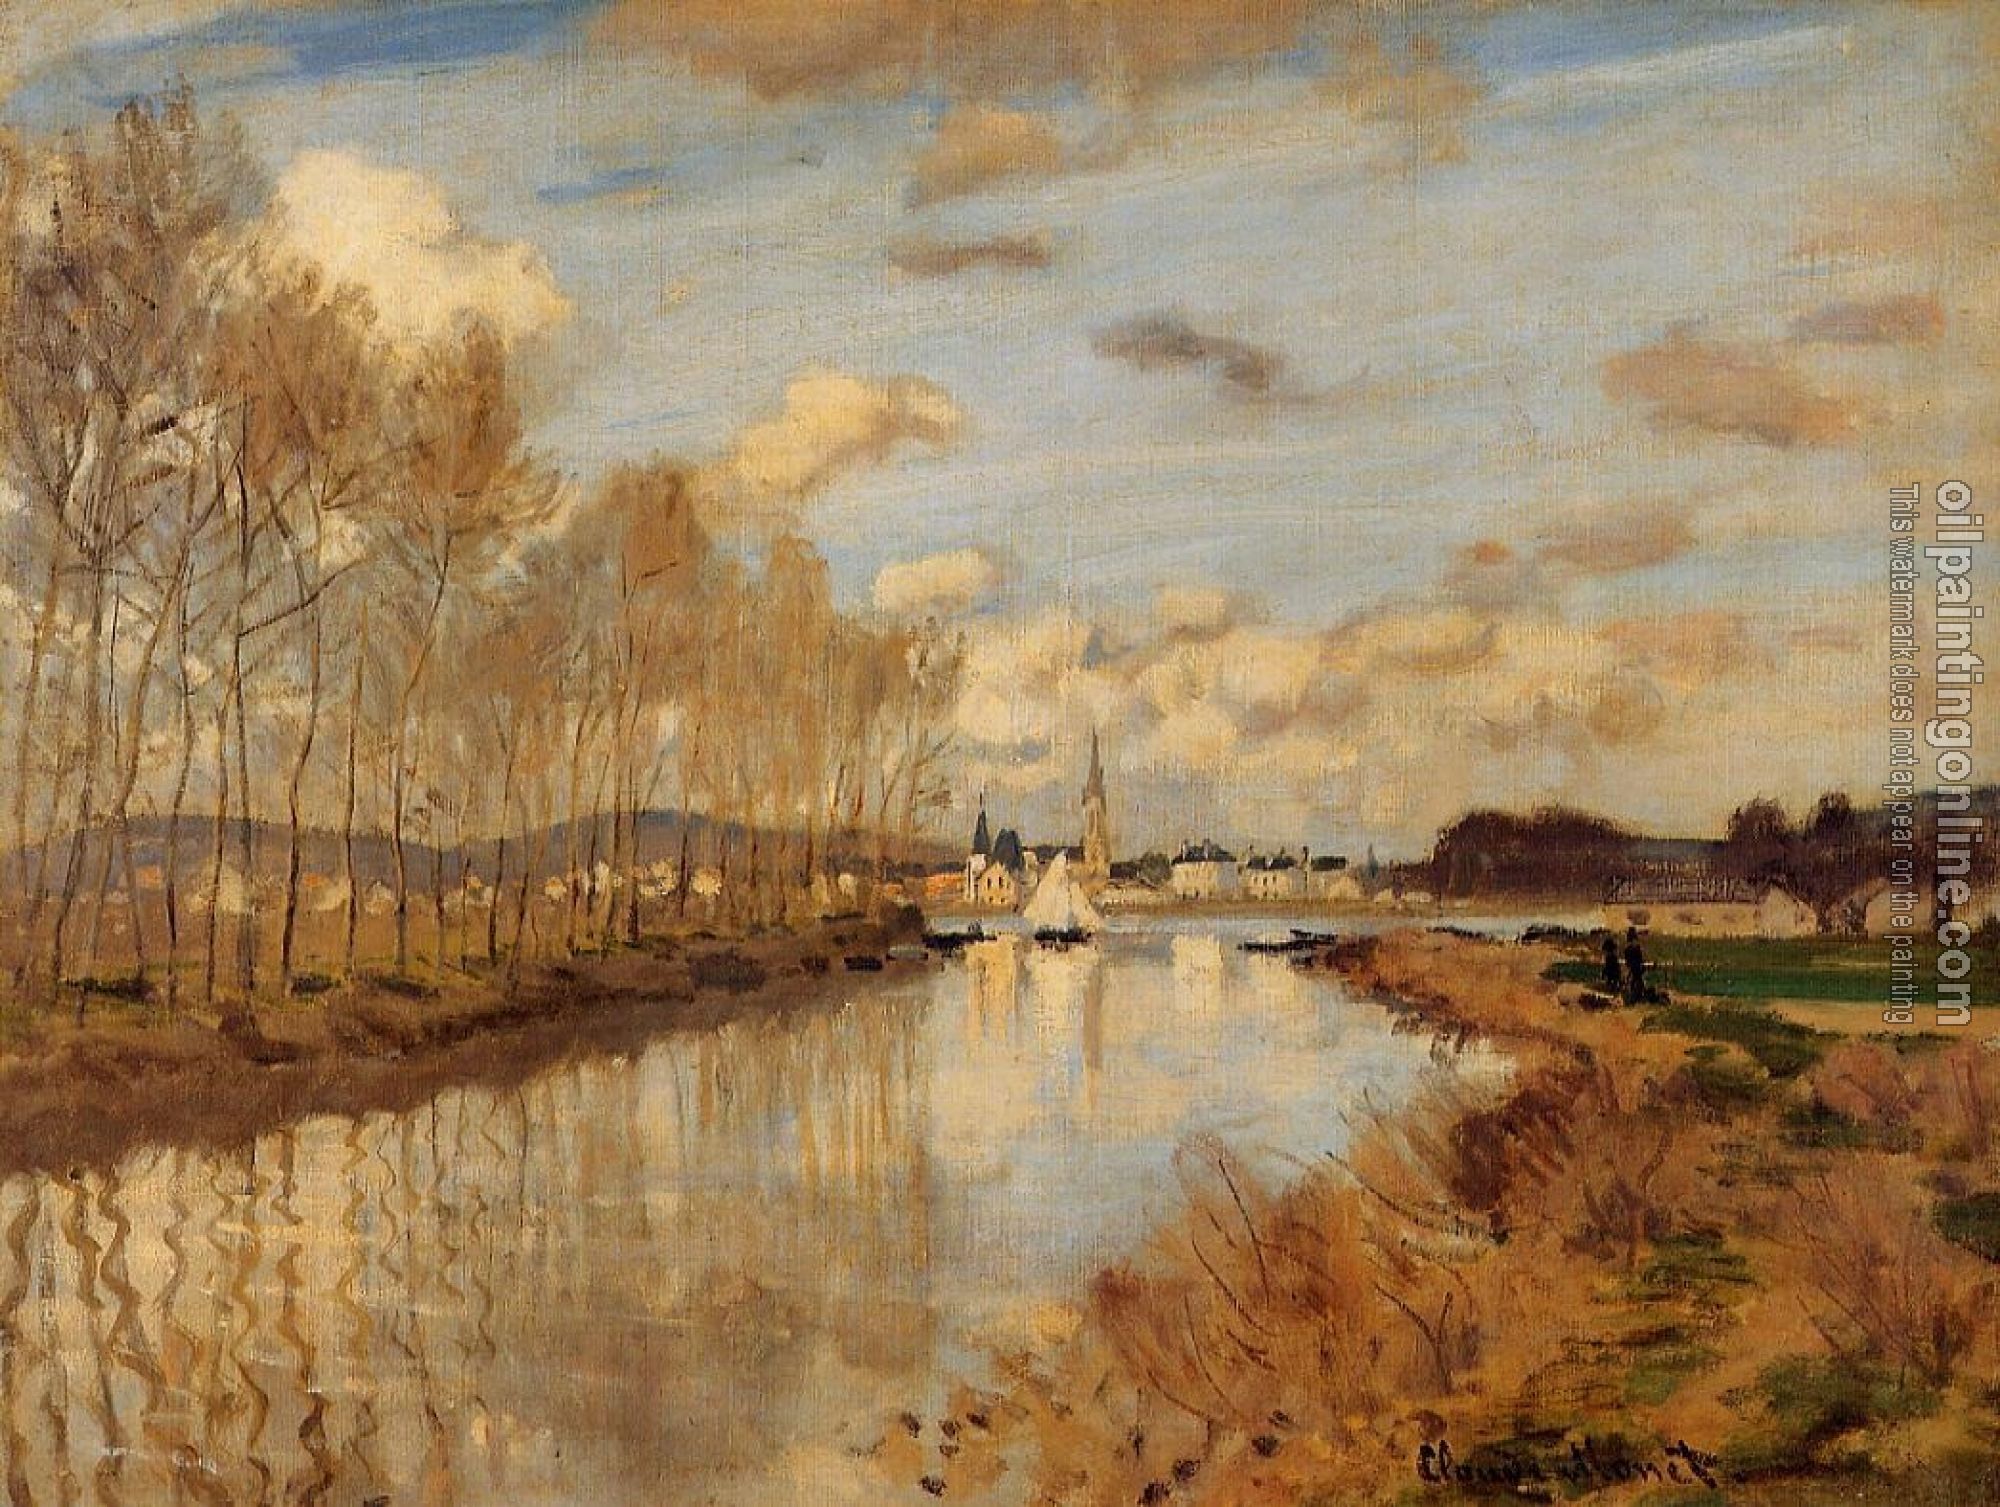 Monet, Claude Oscar - Argenteuil, Seen from the Small Arm of the Seine